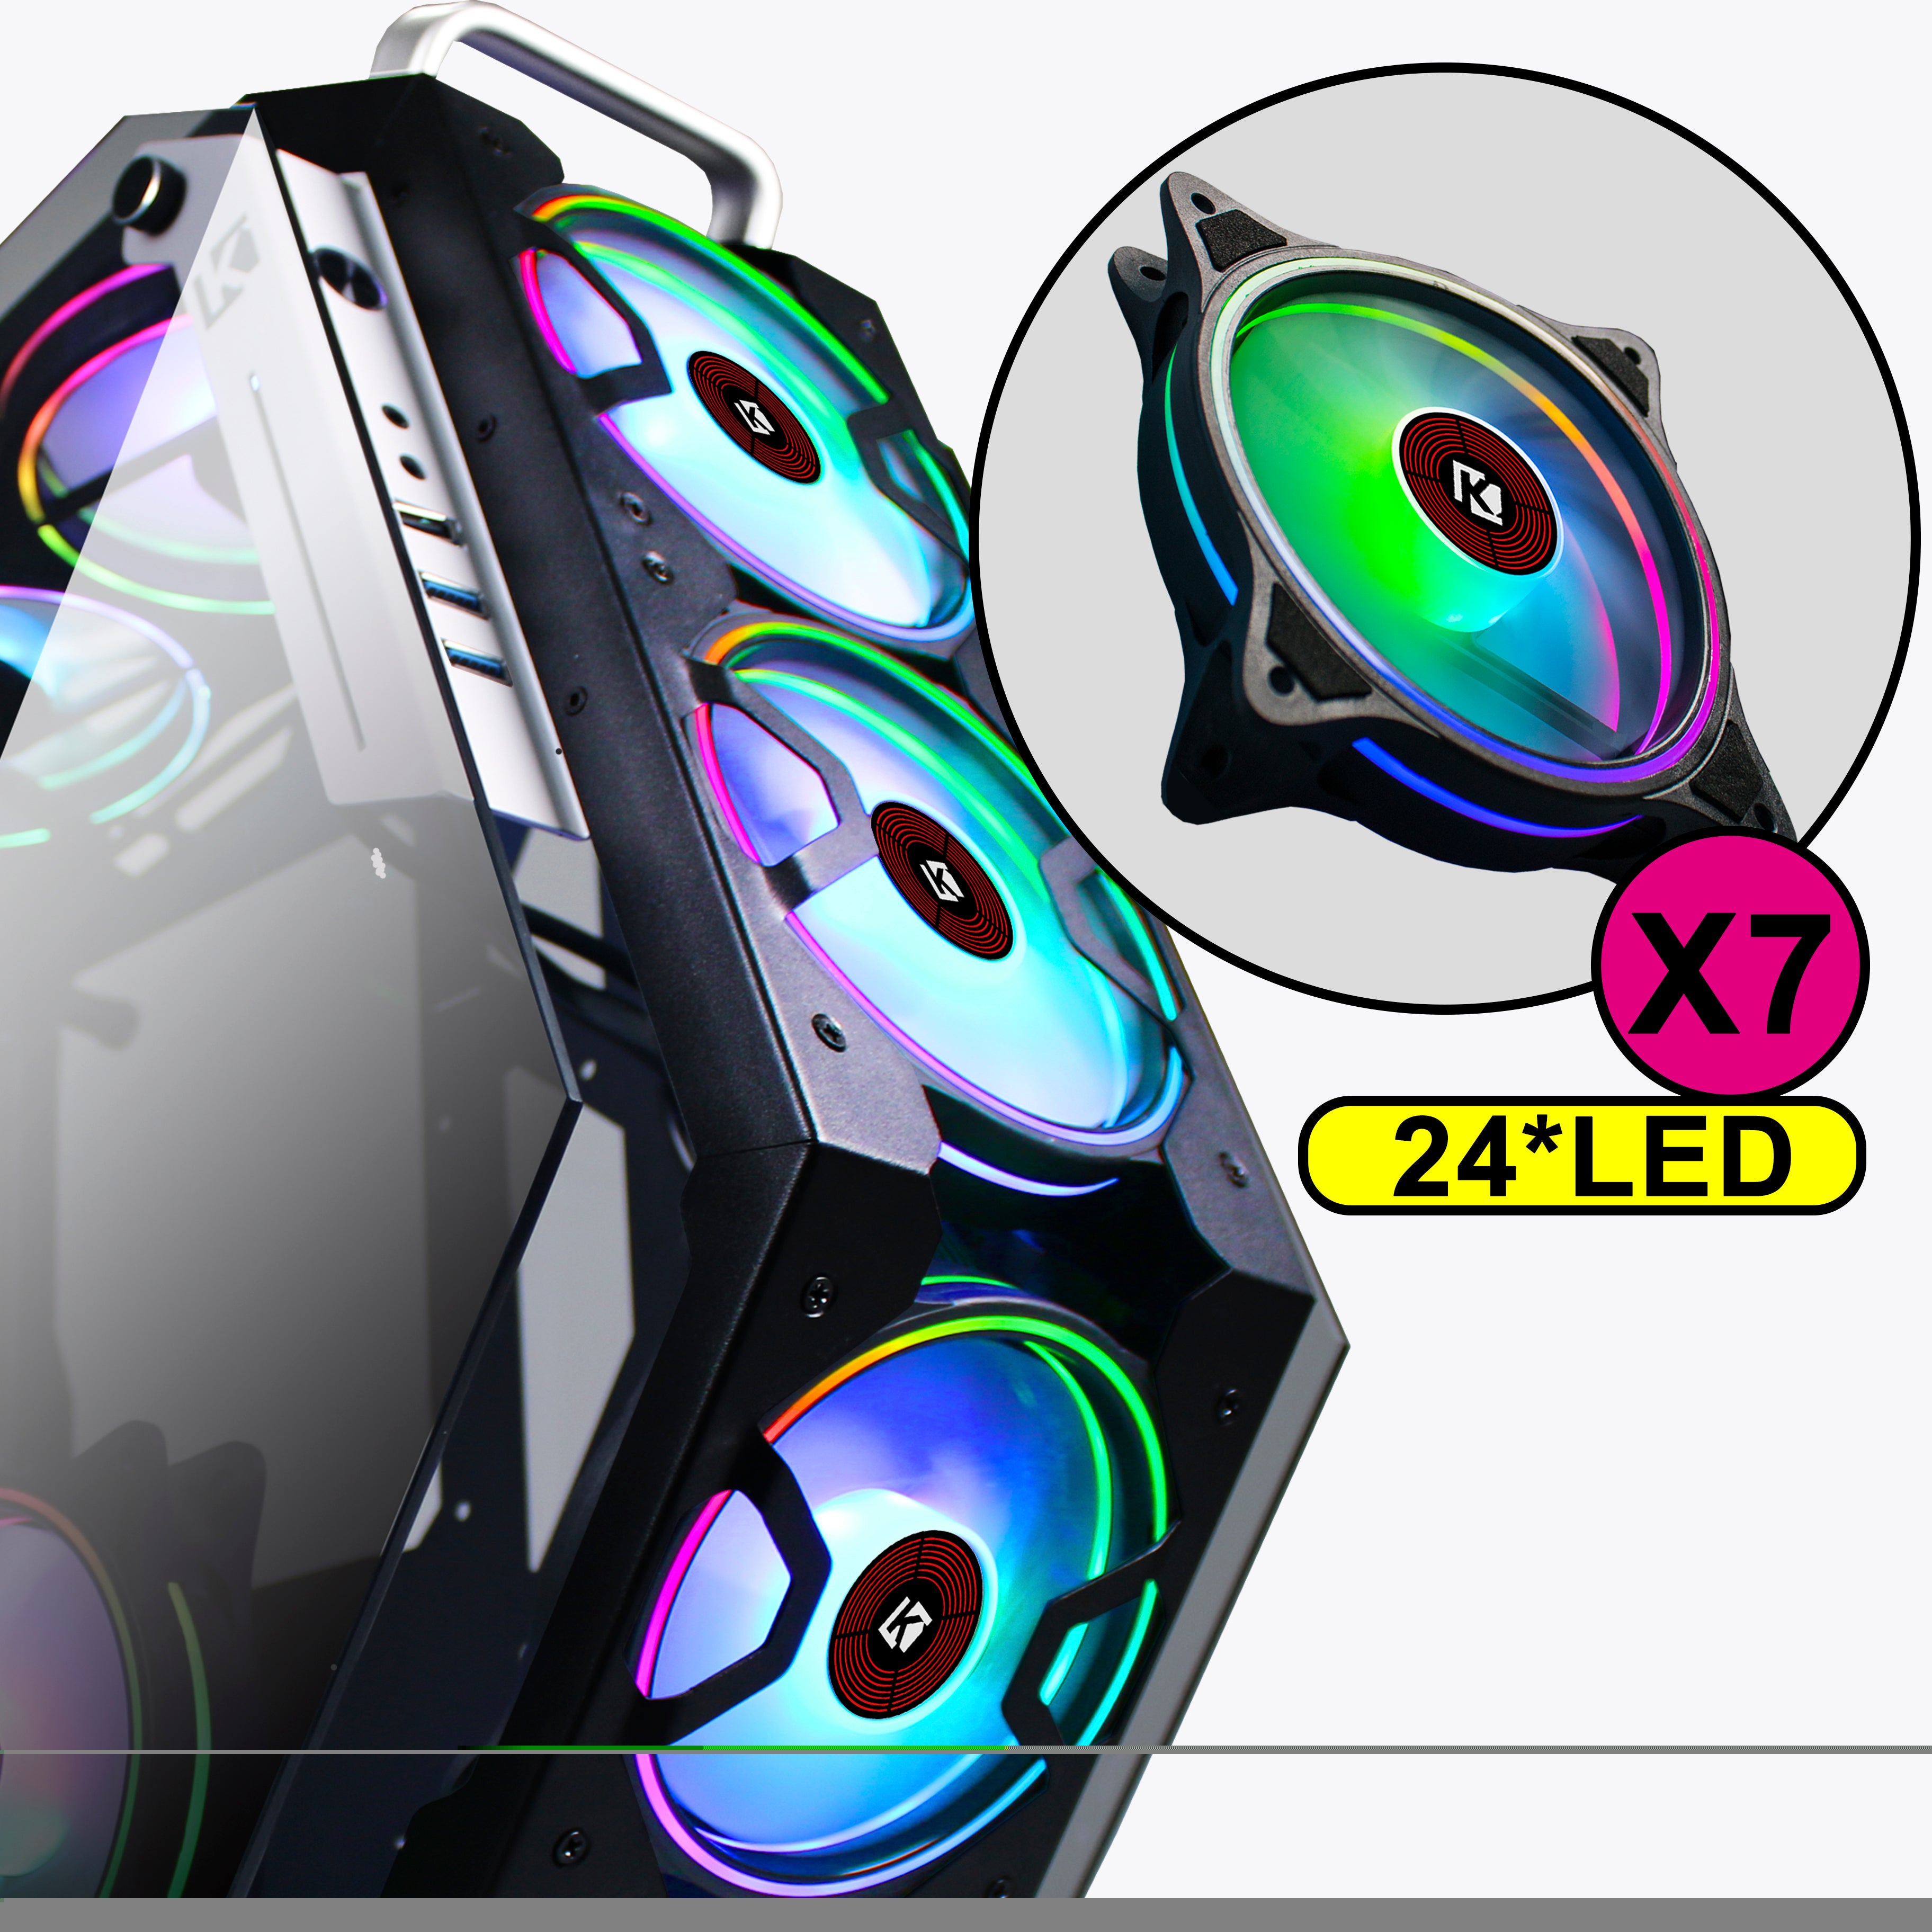 KEDIERS RGB Case Fans 120mm Silent Computer LED Cooling PC Case(SINGLE FAN  ONLY)